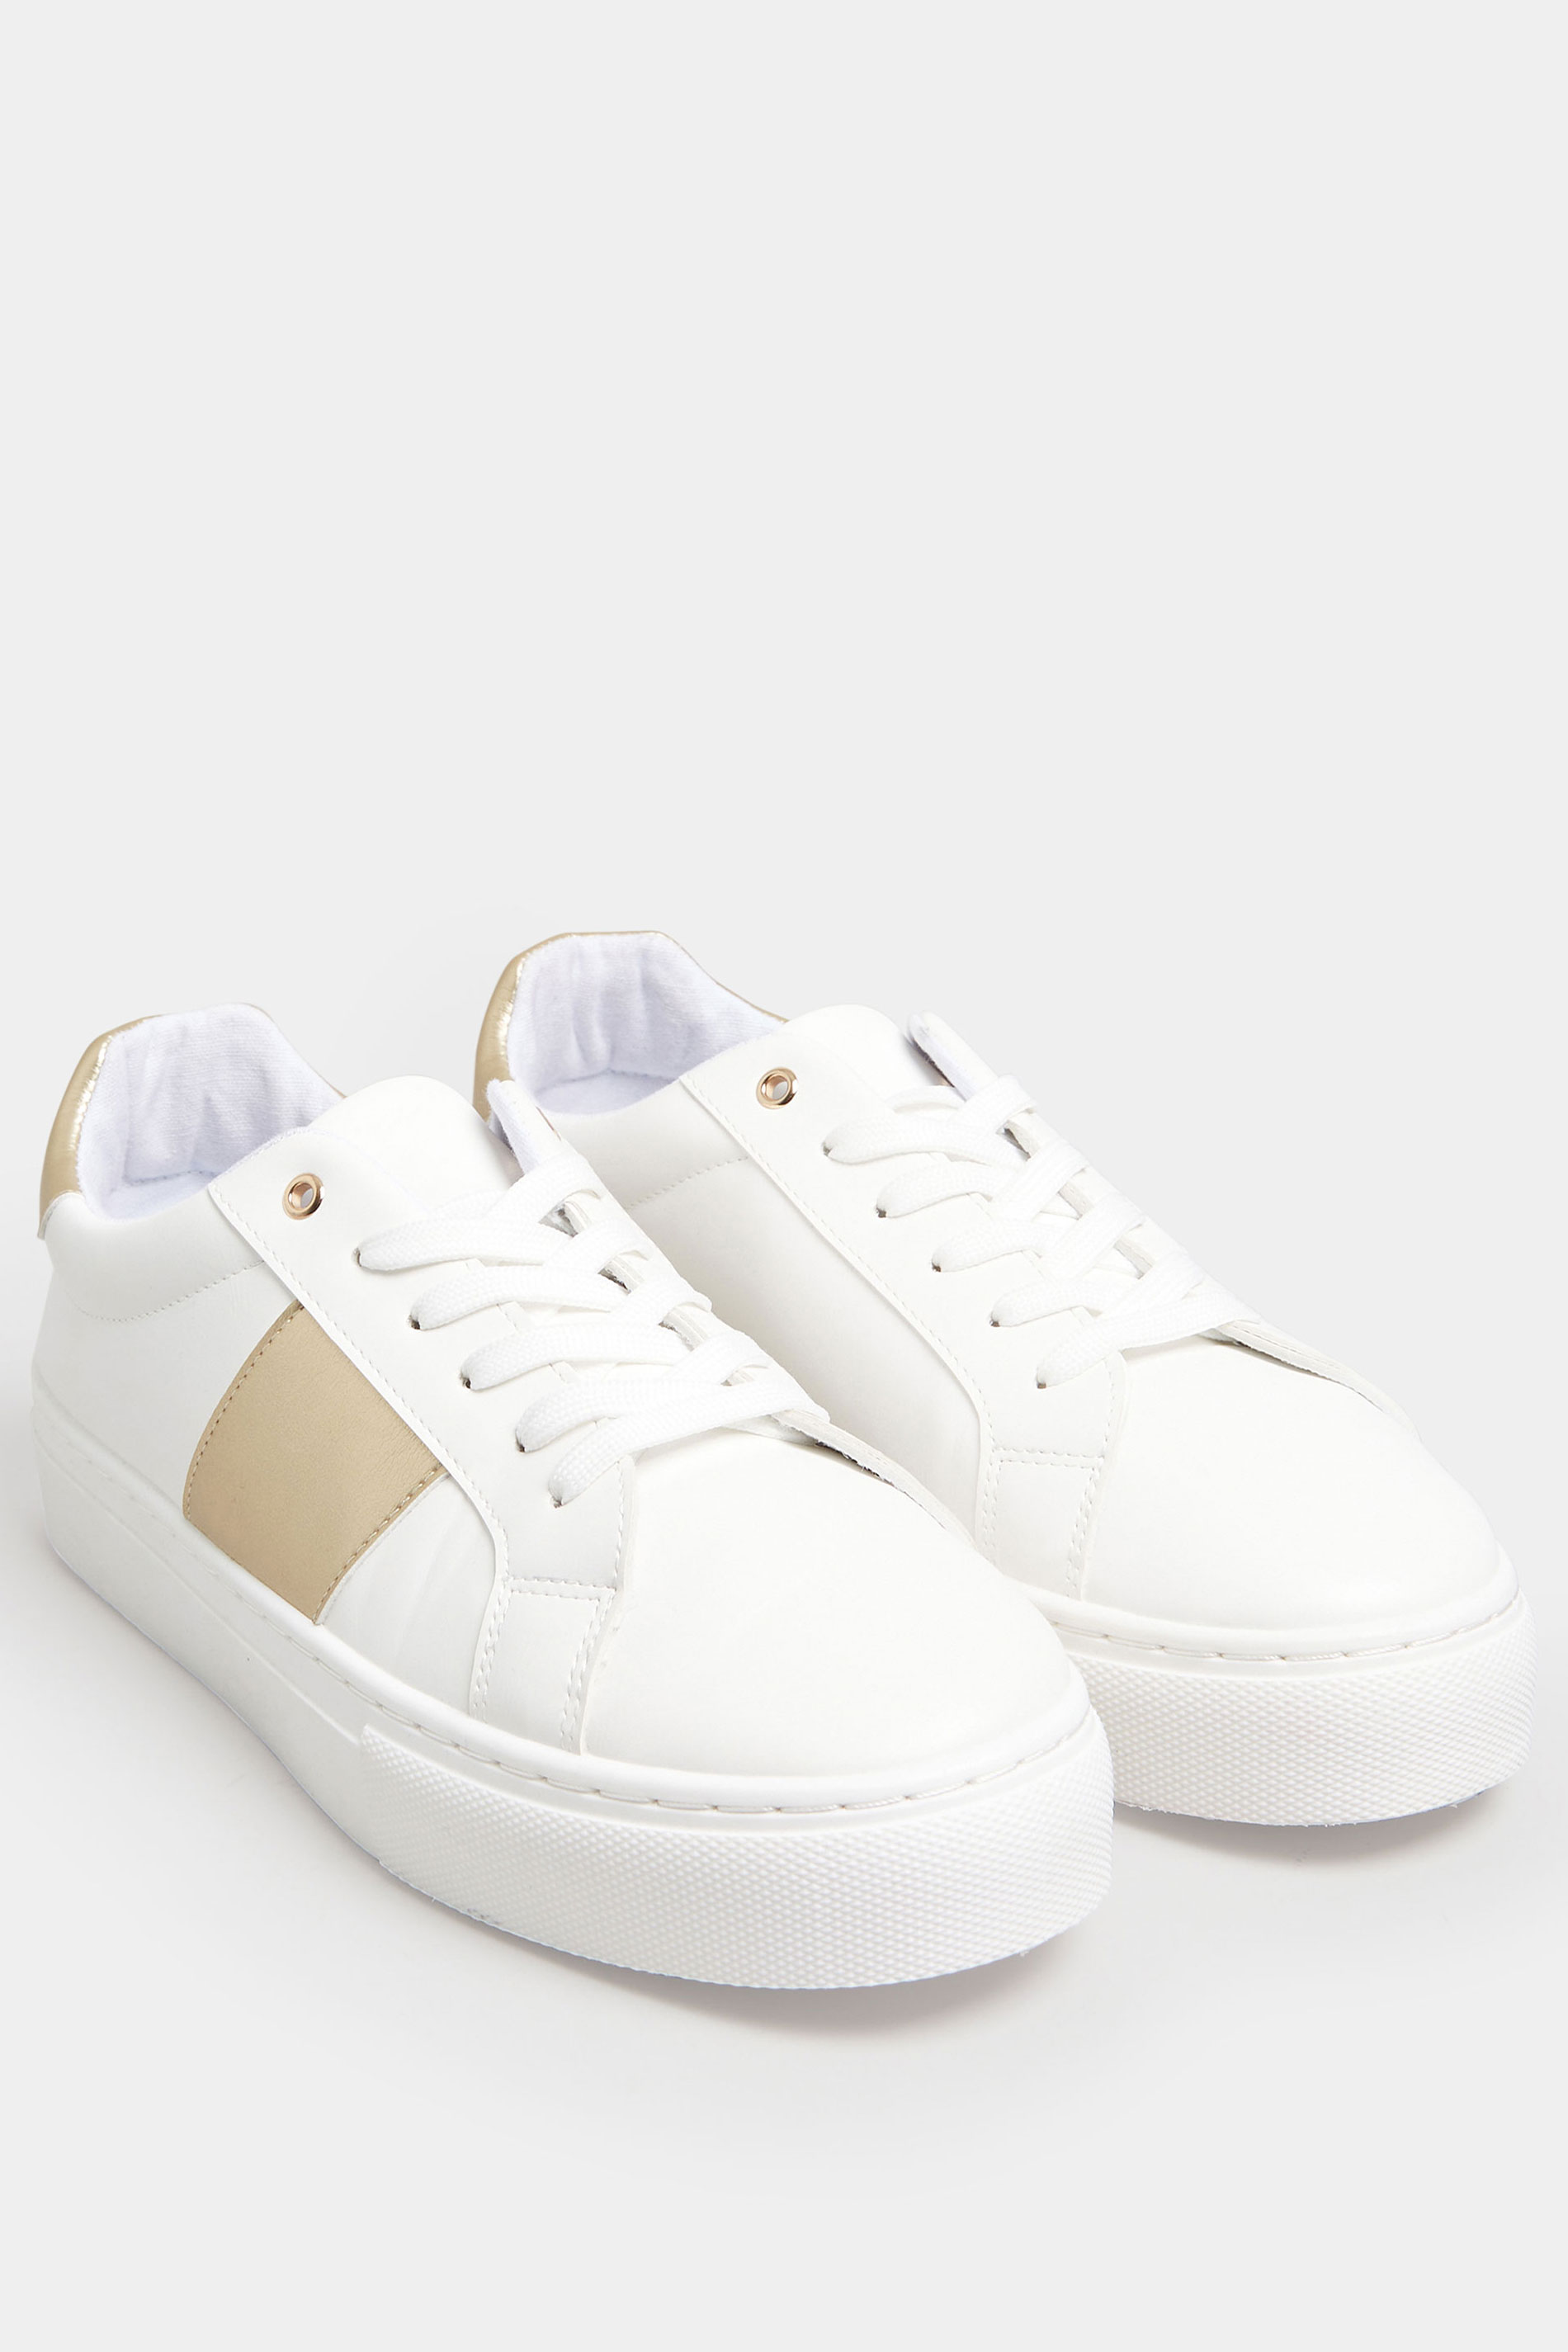 LIMITED COLLECTION White & Gold Stripe Trainers In Wide EEE Fit | Yours Clothing 2